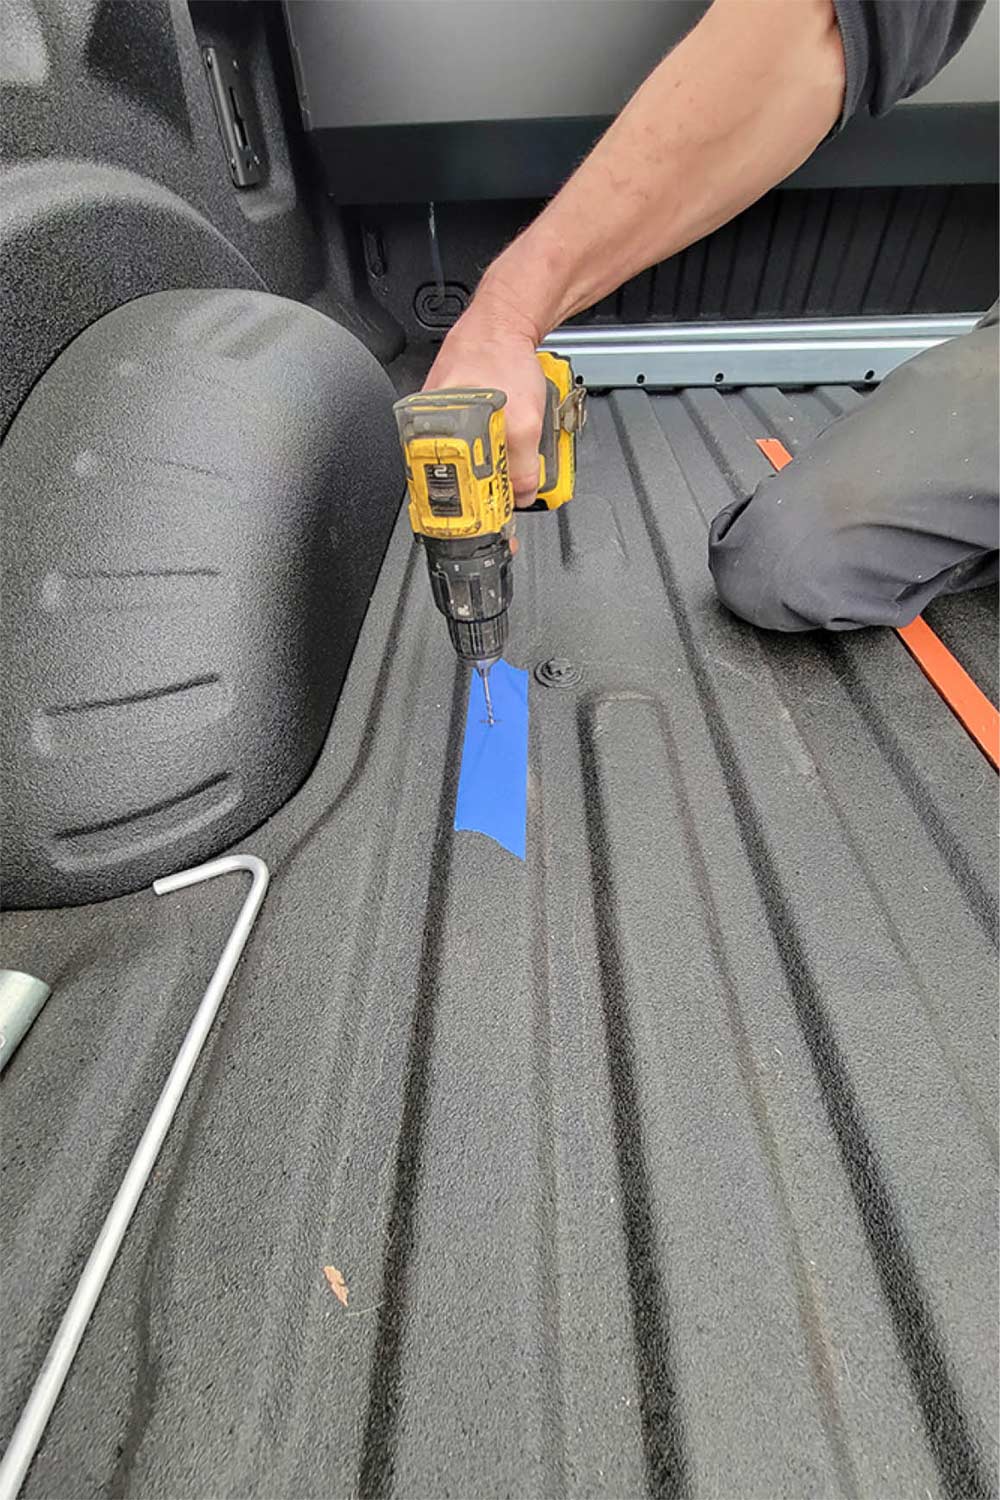 drilling pilot holes in the truck bed